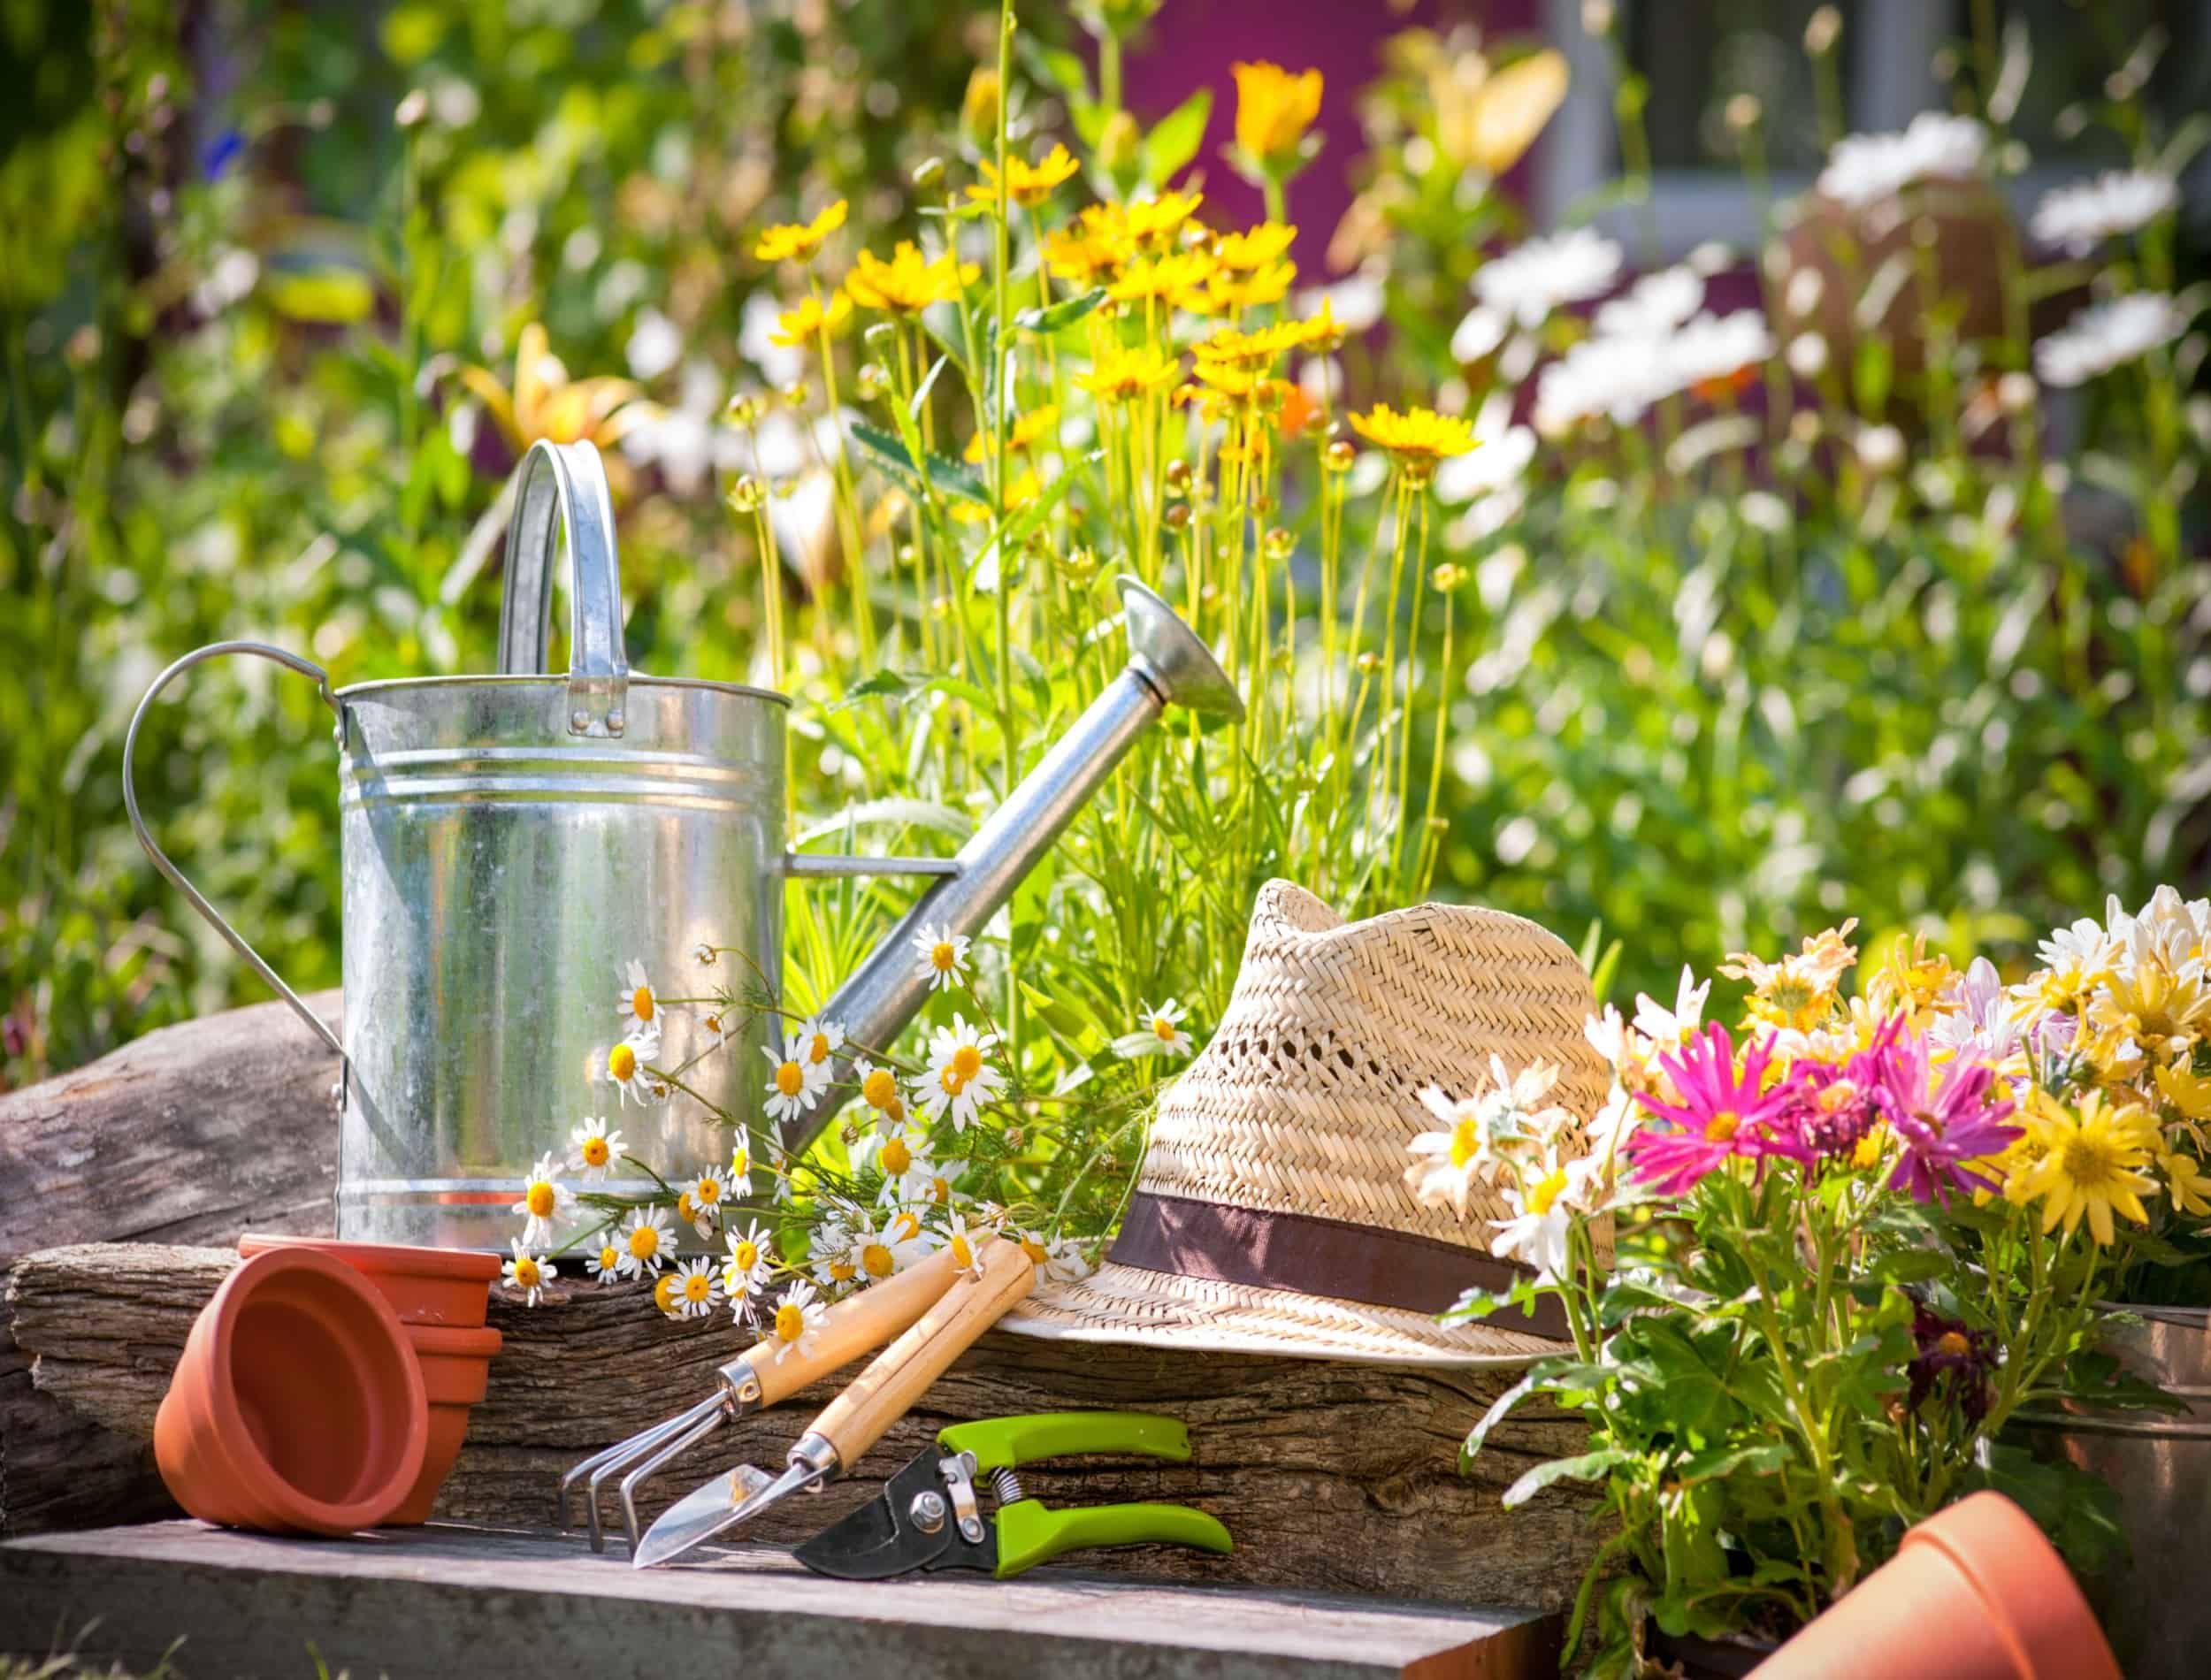 Gardening tools and straw hat on the grass in the garden